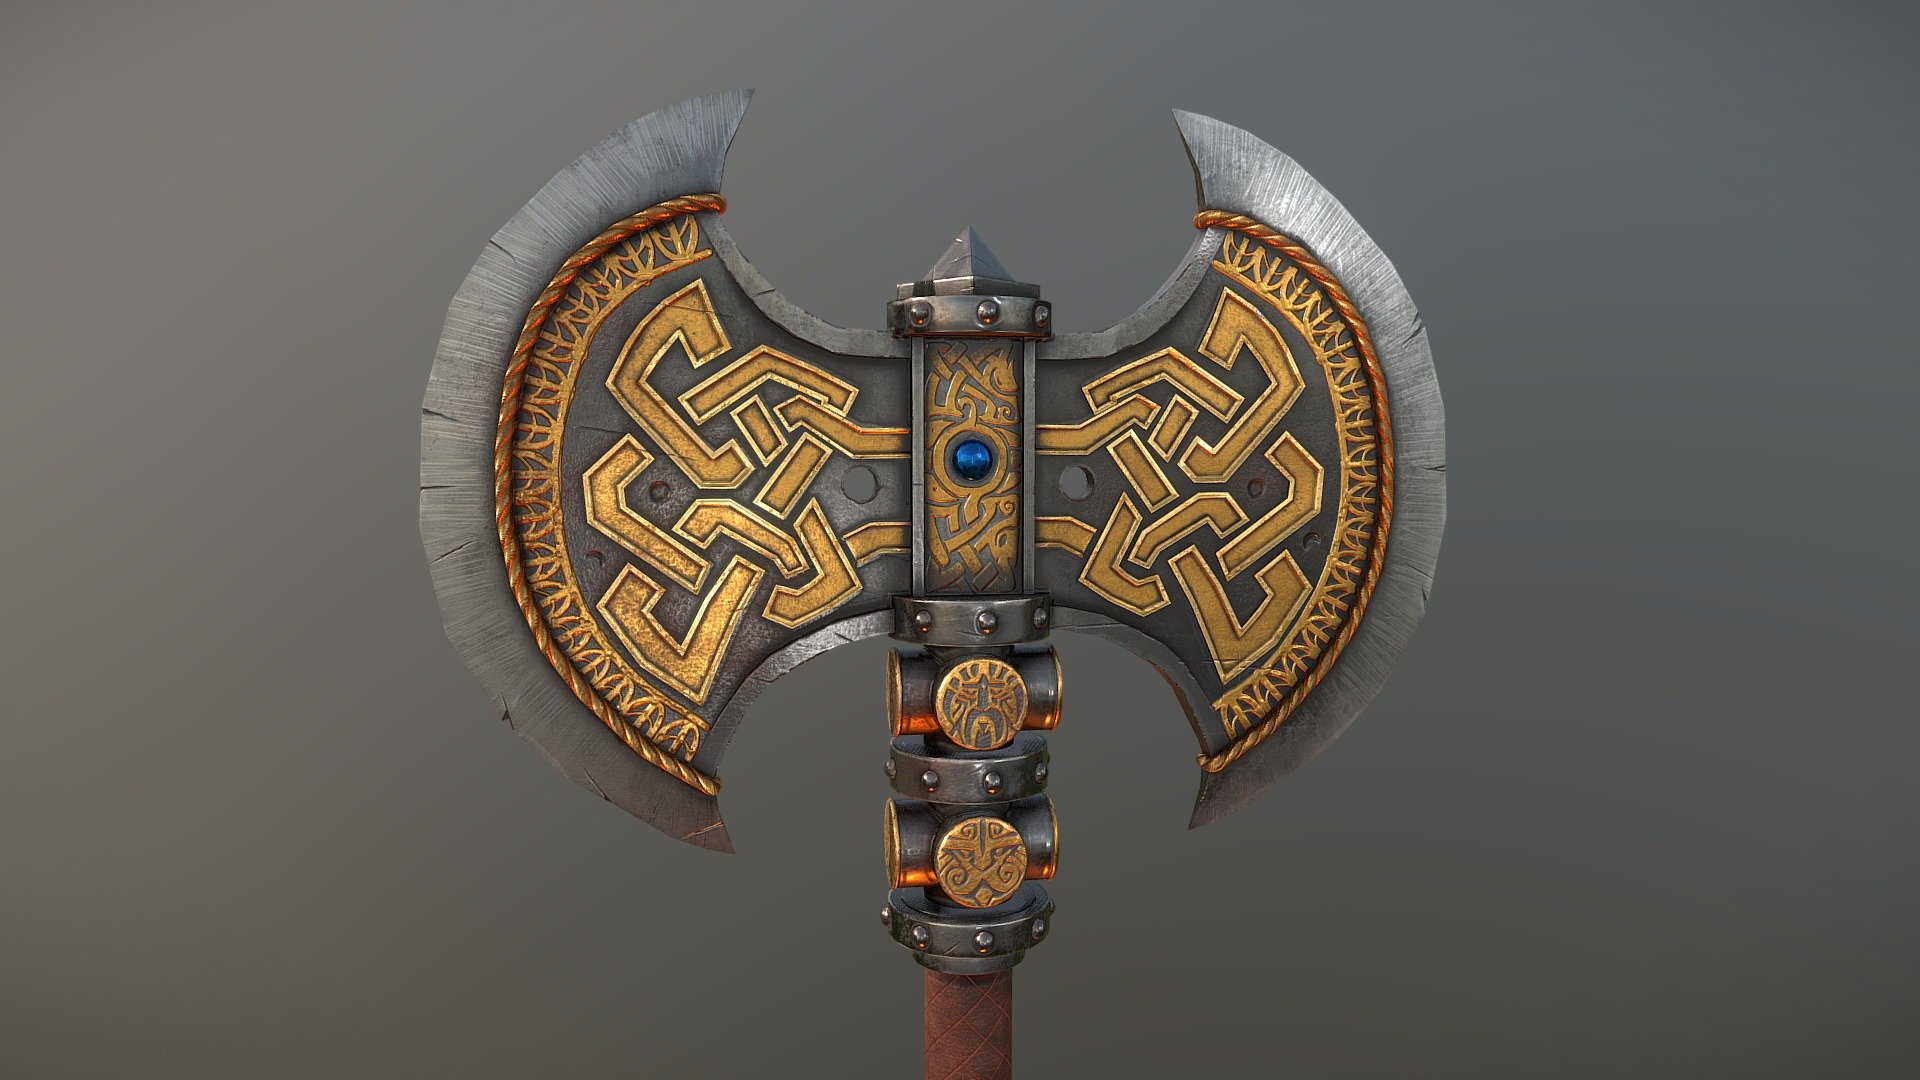 This is my final asset for my first year at Uni (Teesside University). It's a Dwarven Axe based on a piece of concept art I was giving to choose from. Modelled using Maya and textured using Substance Painter and Adobe Photoshop 3d model